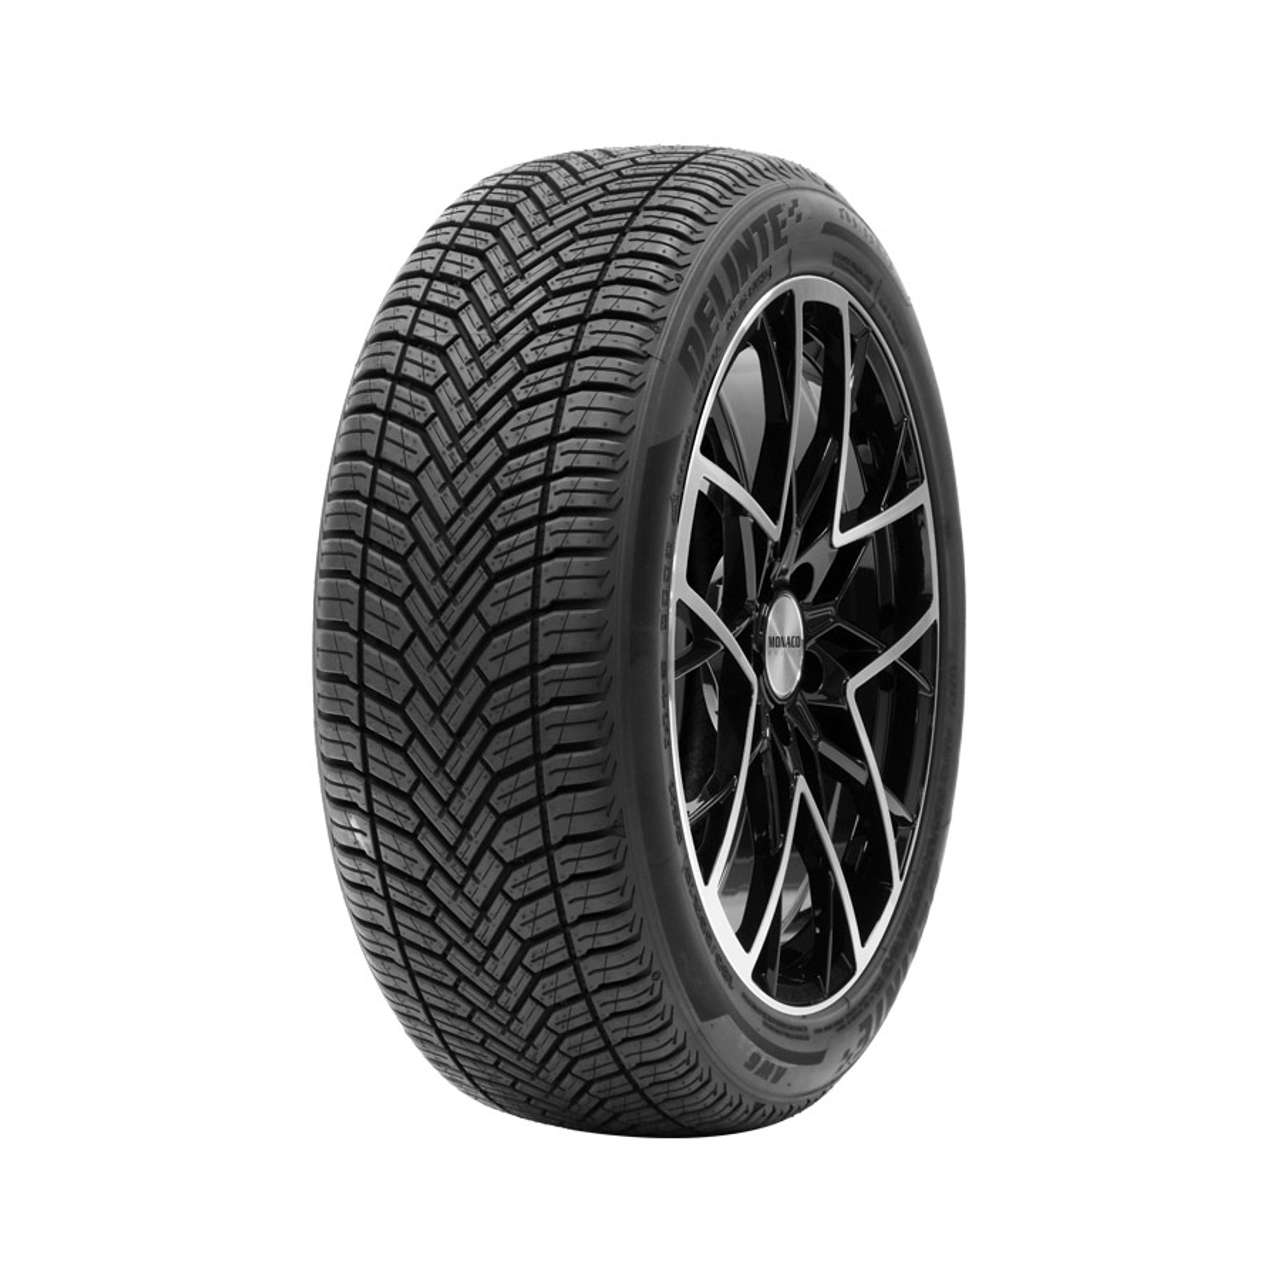 DELINTE AW6 175/65R14 86H BSW